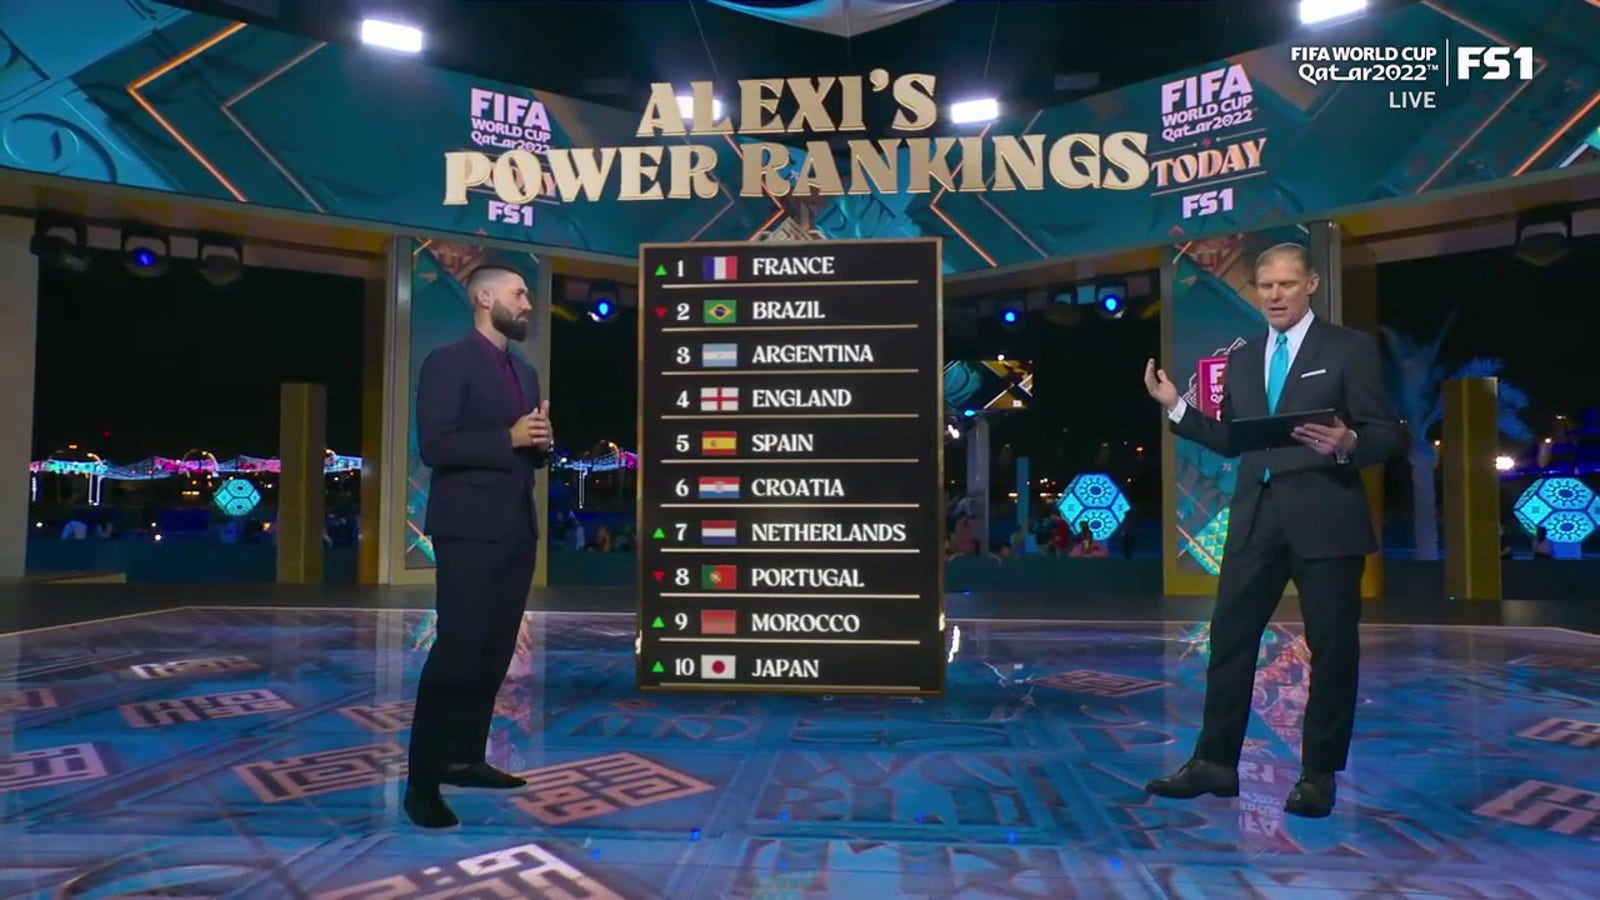 France, Brazil, Argentina included in Alexi Lalas' updated World Cup power rankings